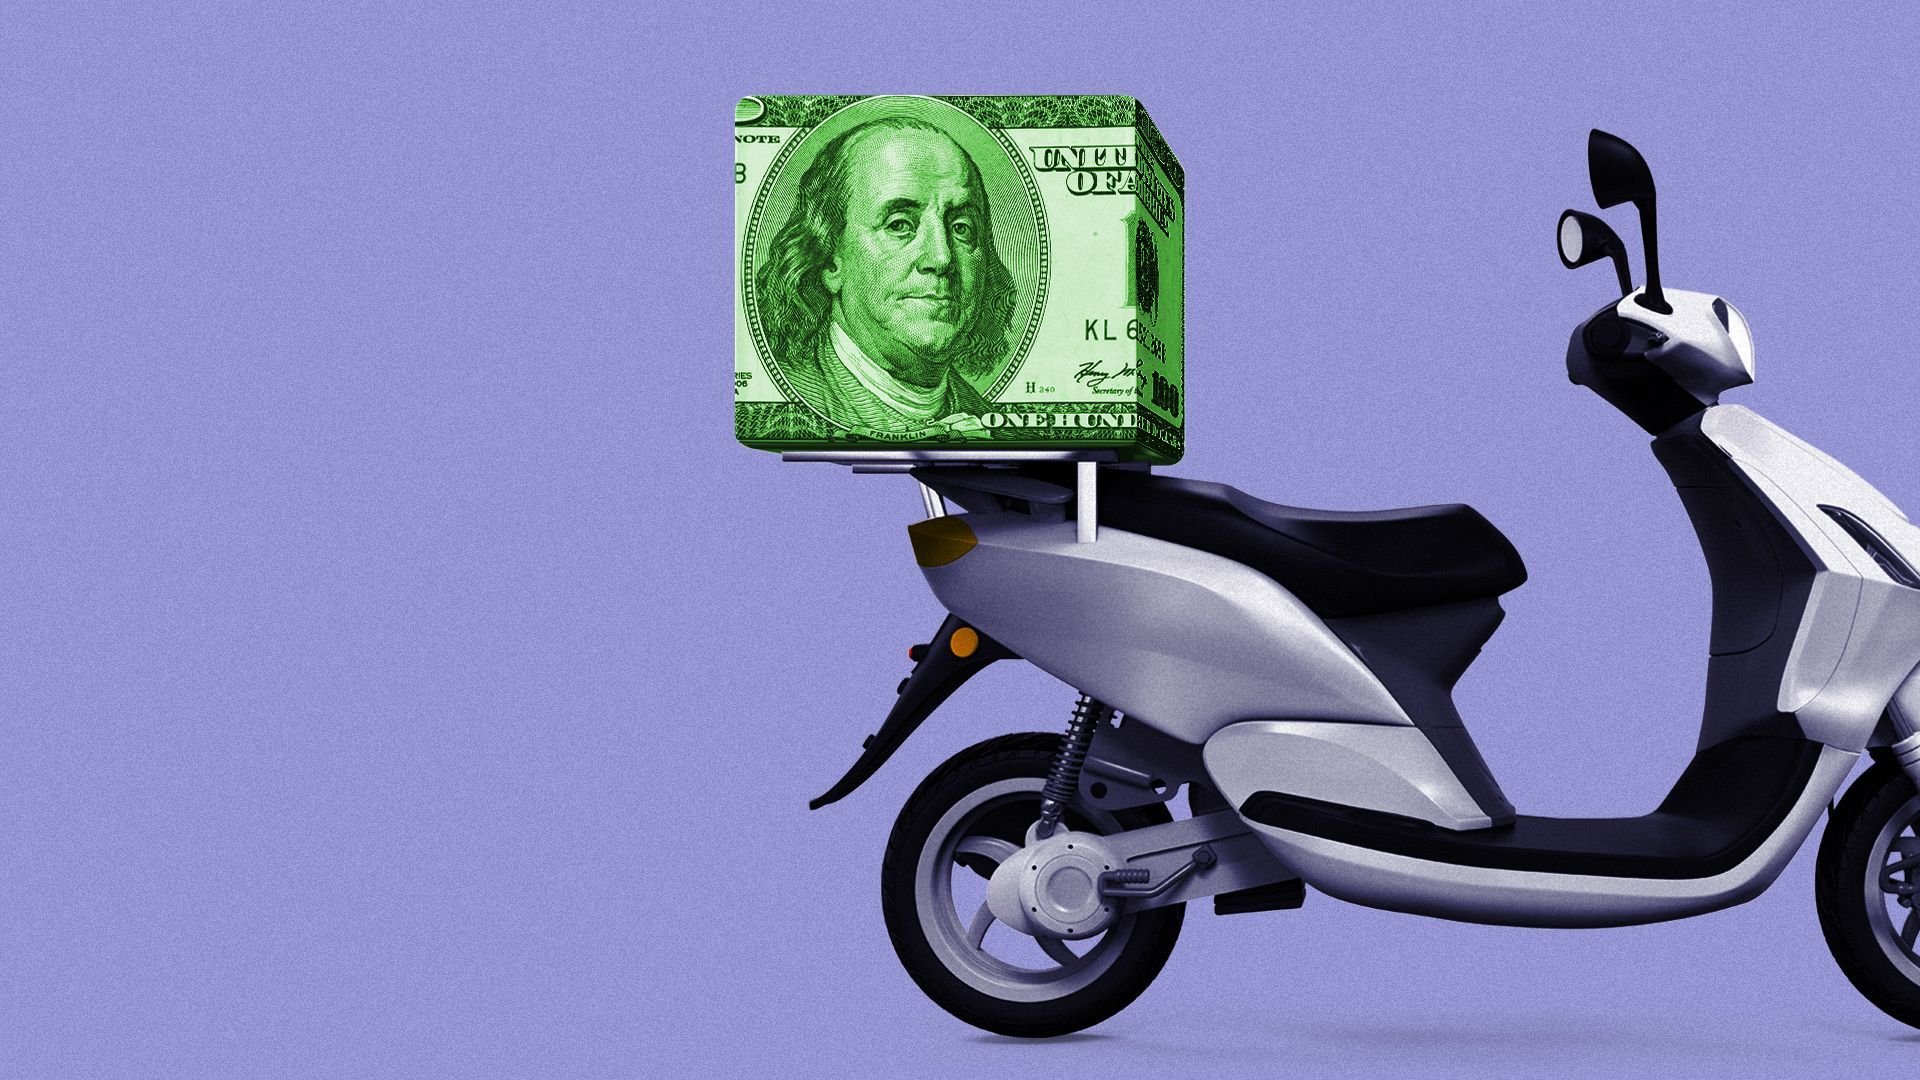 Illustration of a scooter with a delivery box on the back made from a $100 bill.